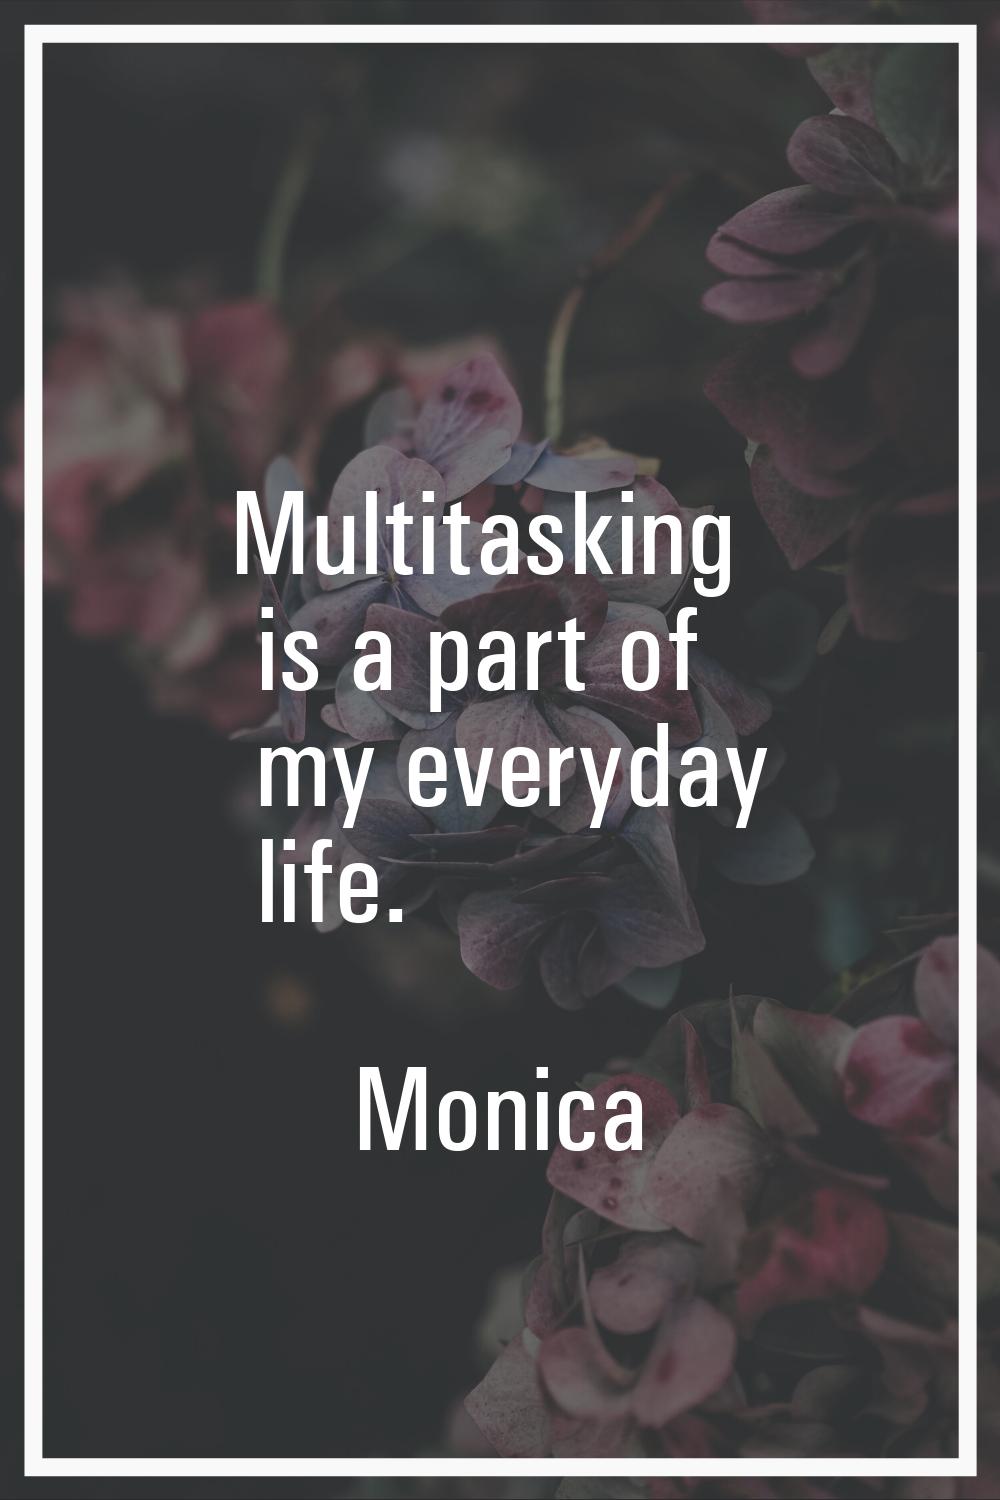 Multitasking is a part of my everyday life.